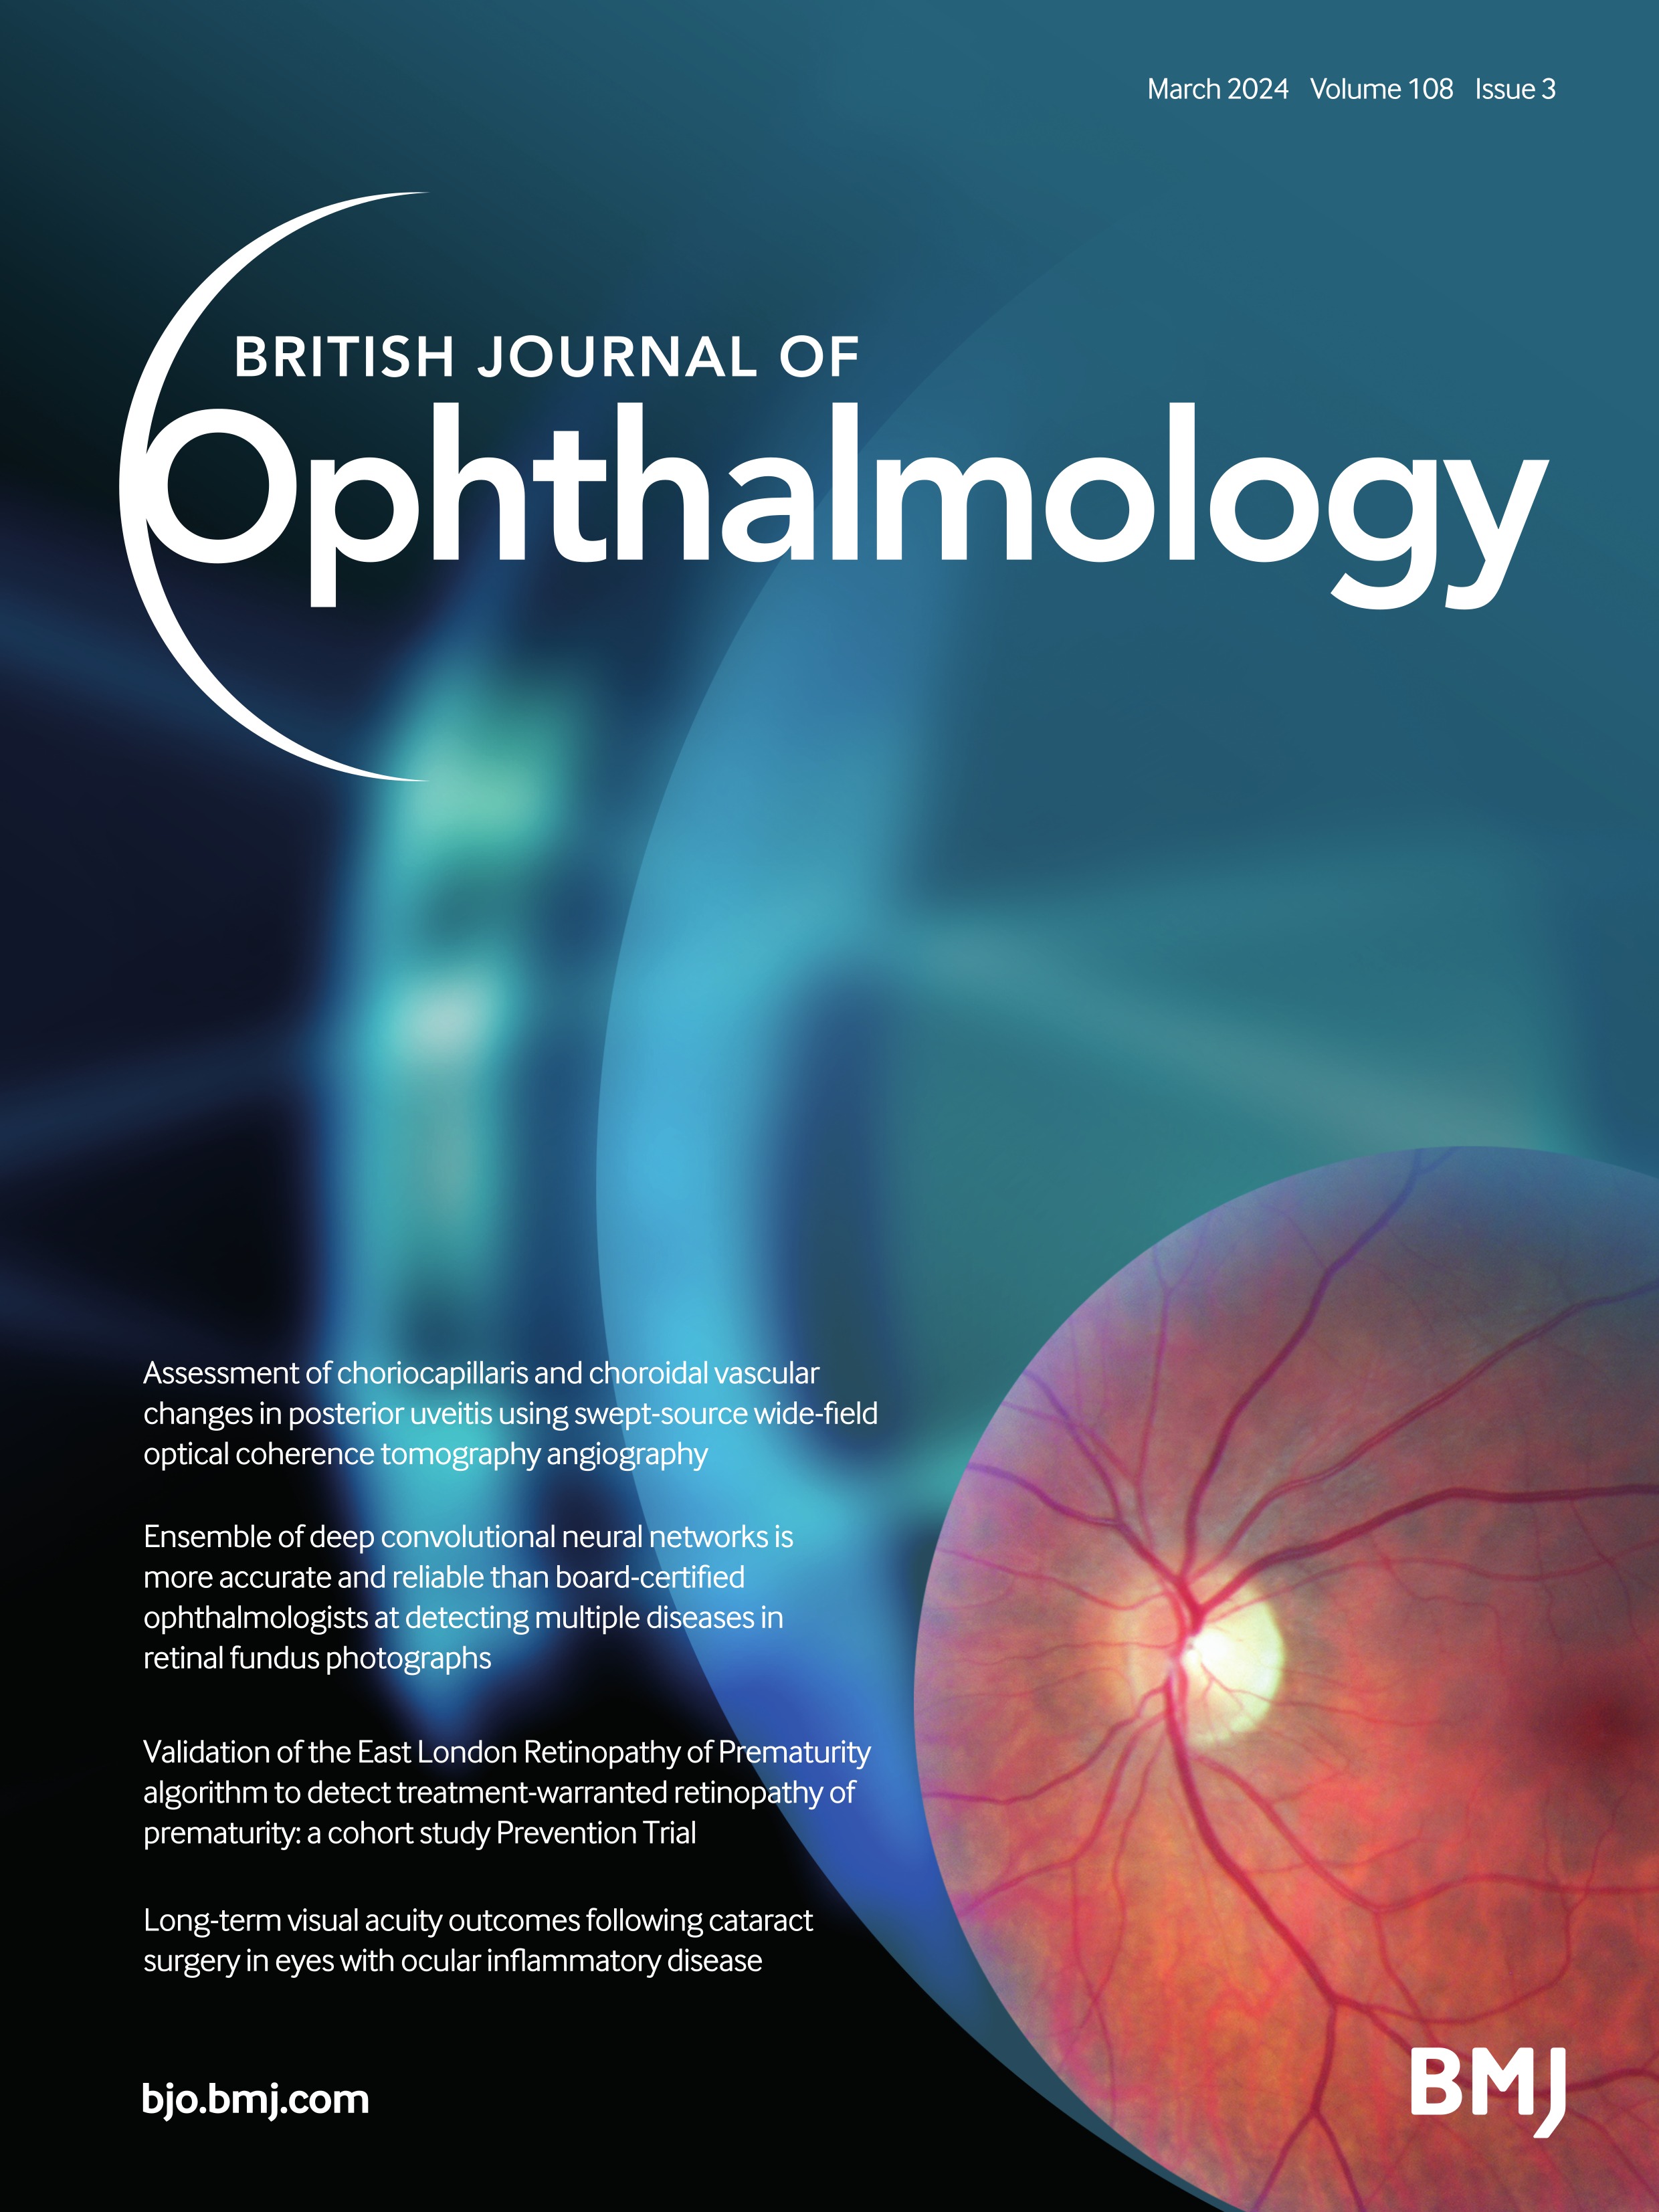 Iris volume change with physiologic mydriasis to identify development of angle closure: the Zhongshan Angle Closure Prevention Trial